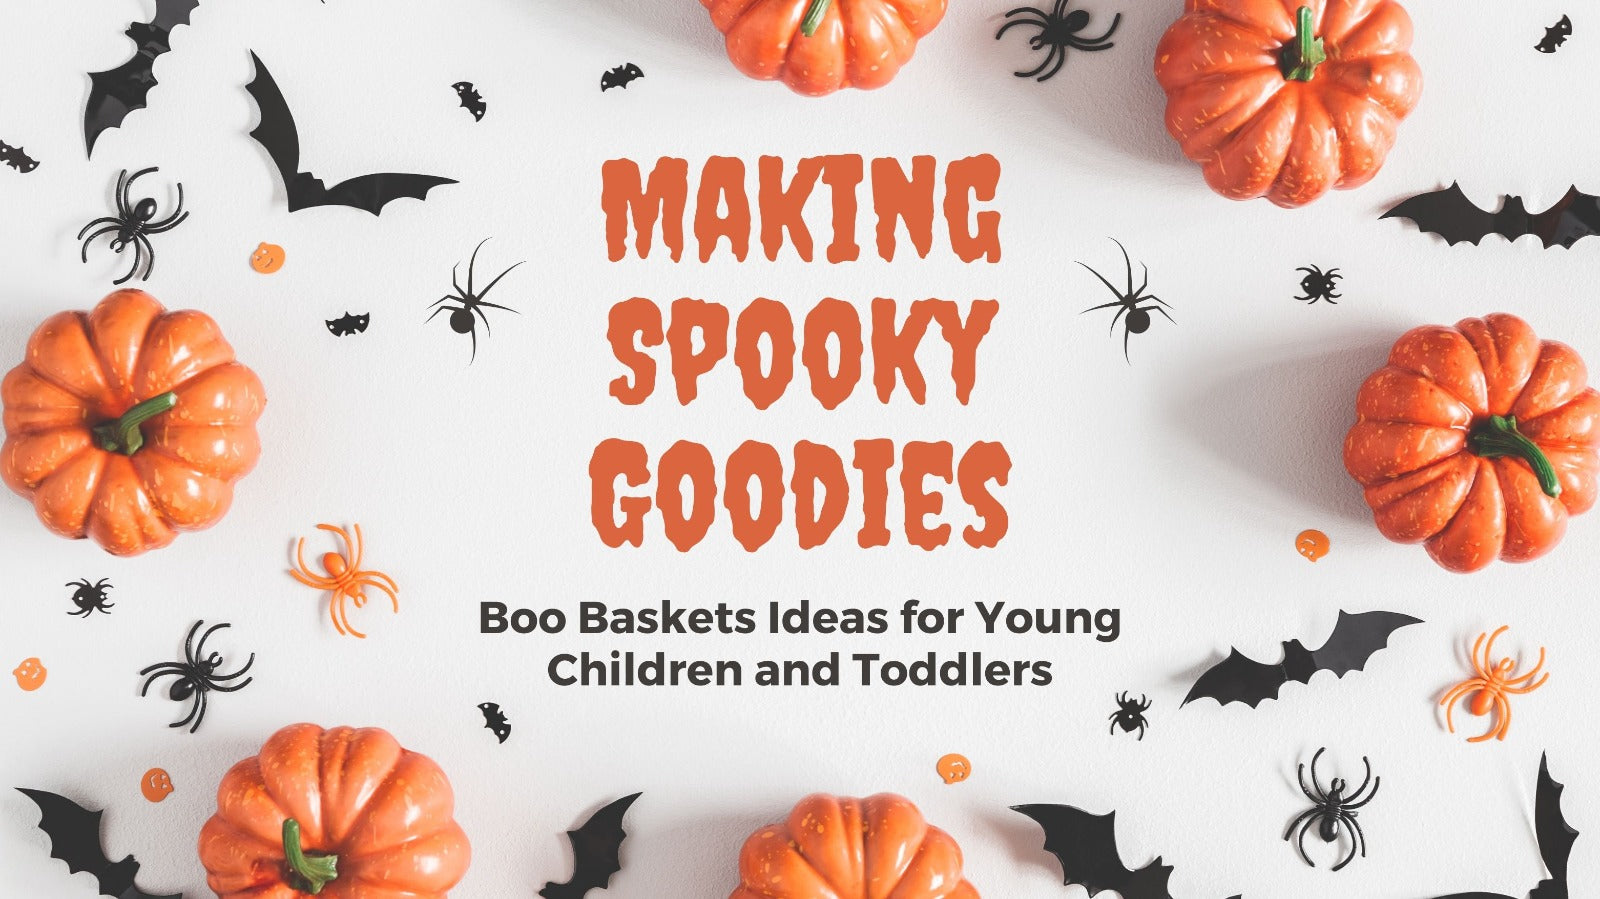 Making Spooky Goodies: Boo Baskets Ideas for Young Children and Toddlers